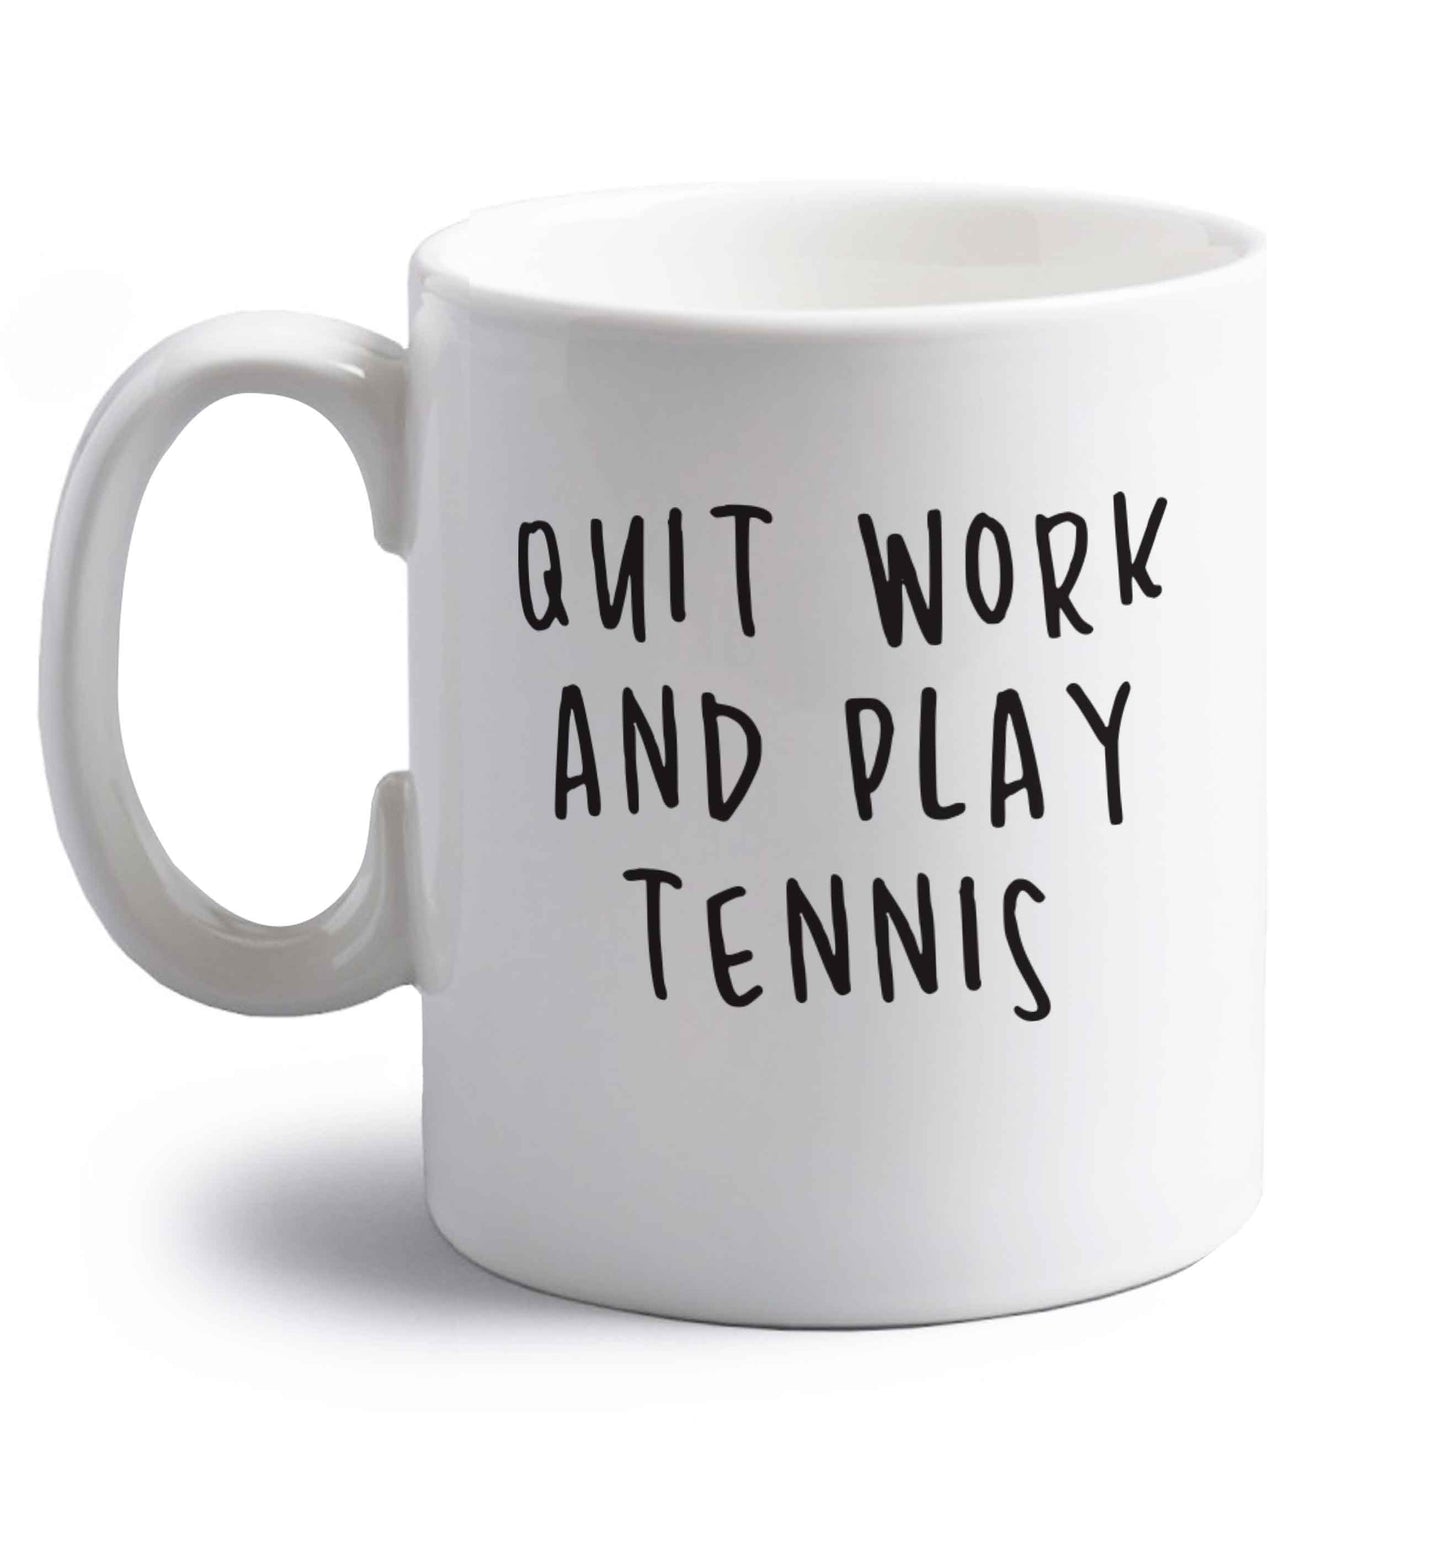 Quit work and play tennis right handed white ceramic mug 